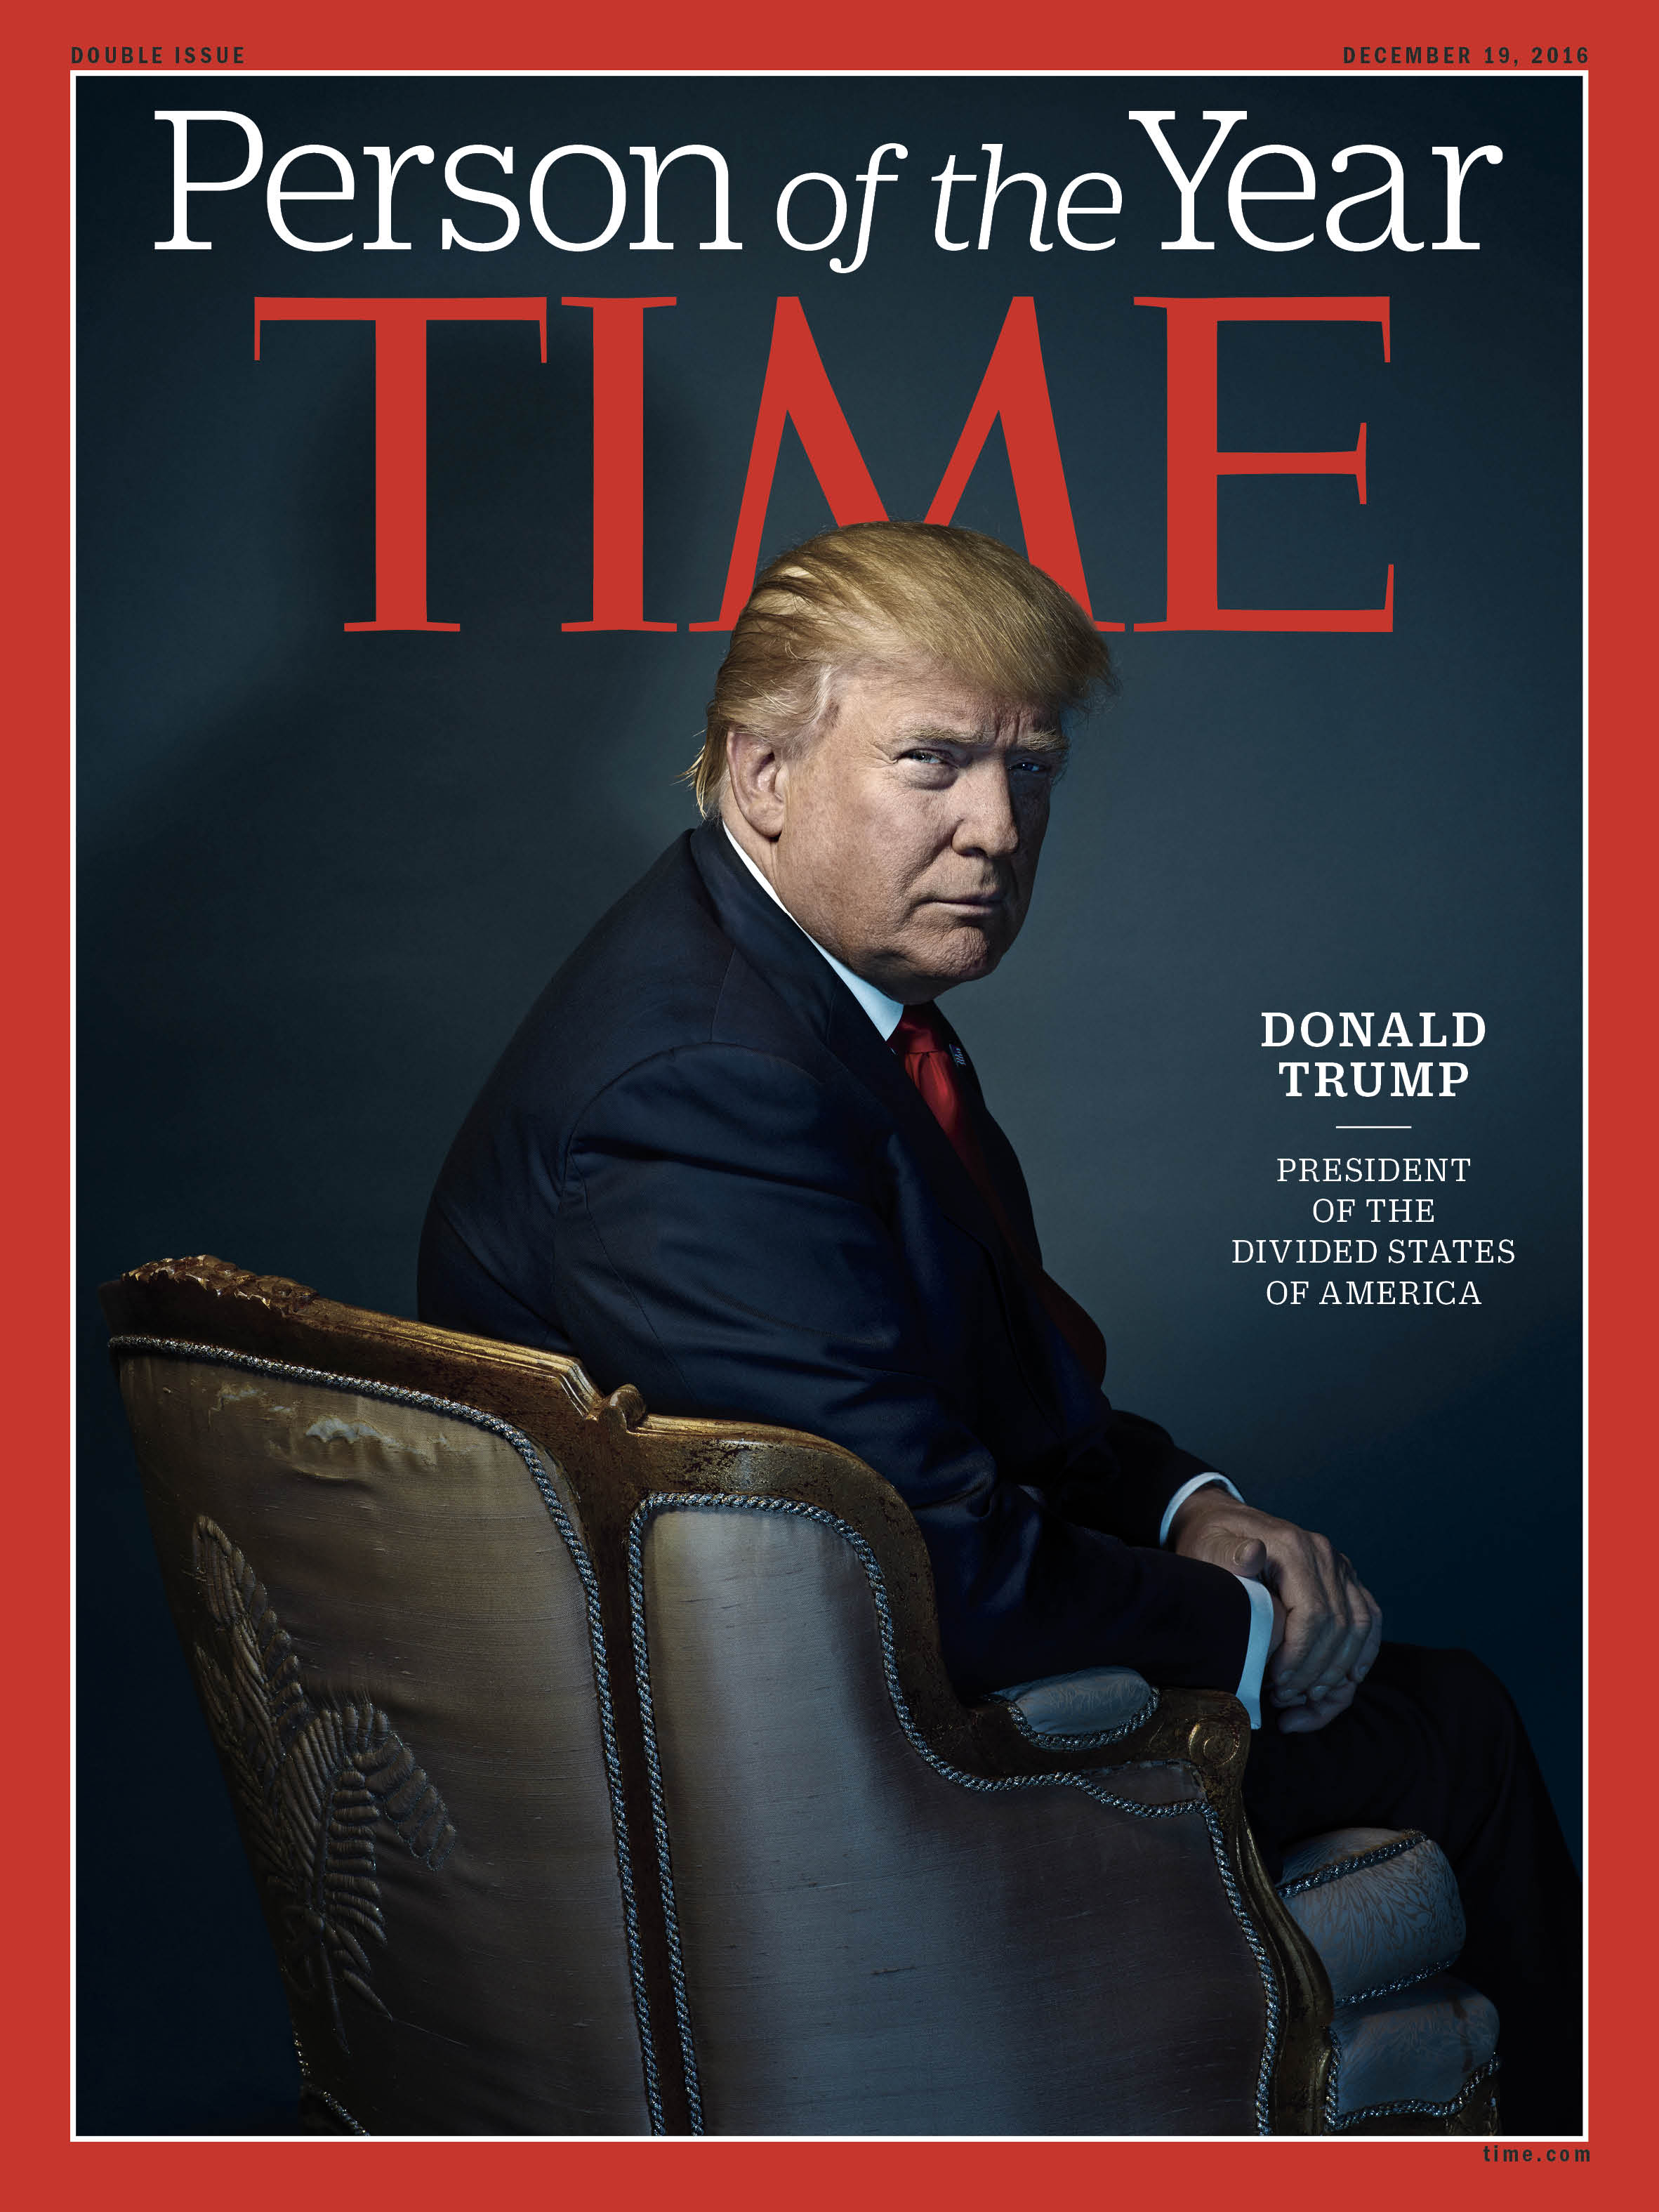 2016: Donald Trump person of the year